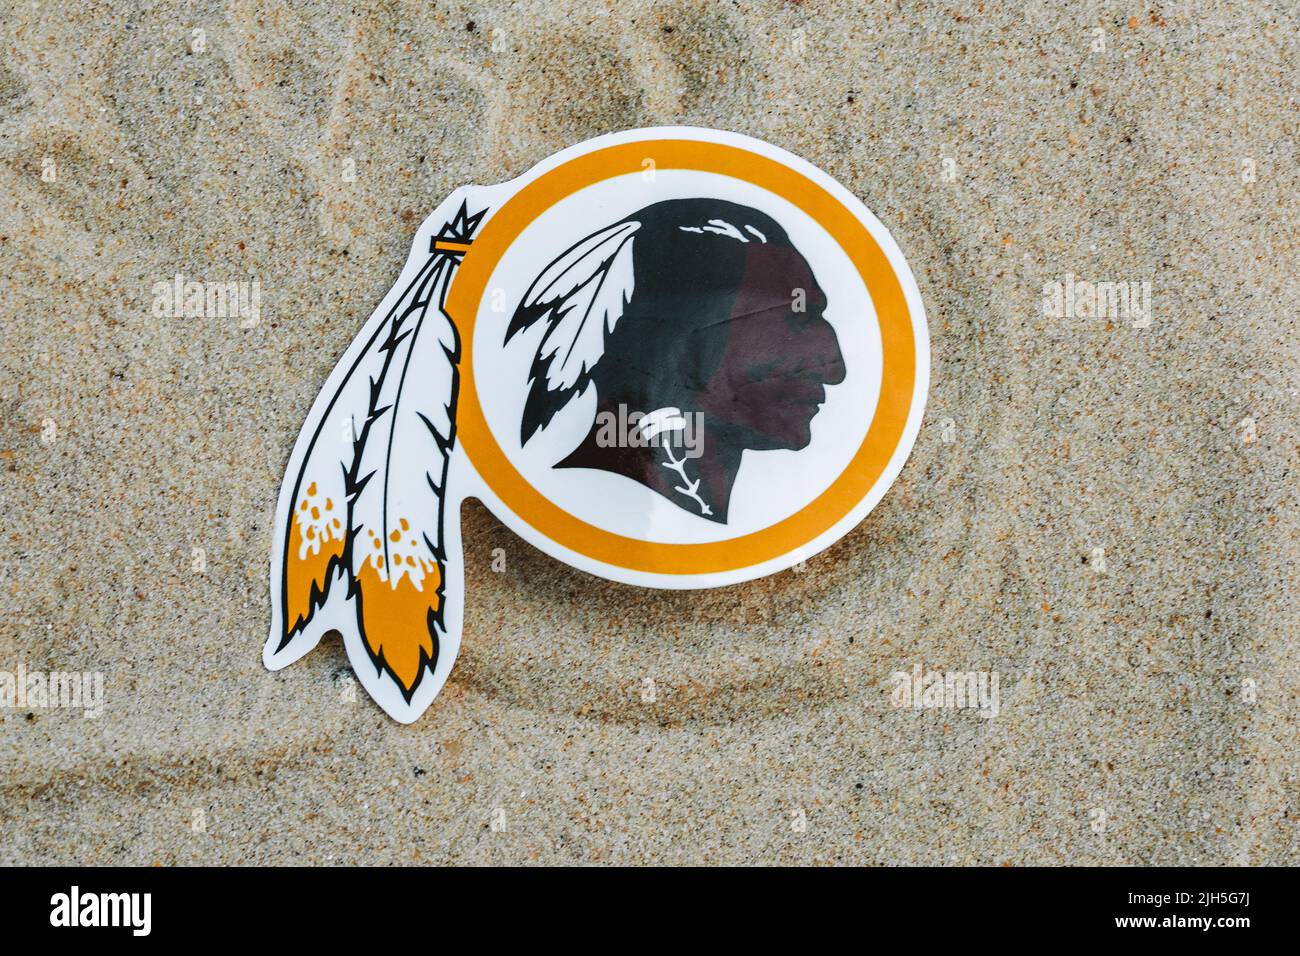 September 15, 2021, Moscow, Russia. The emblem of the Washington Redskins football club on the sand of the beach. Stock Photo